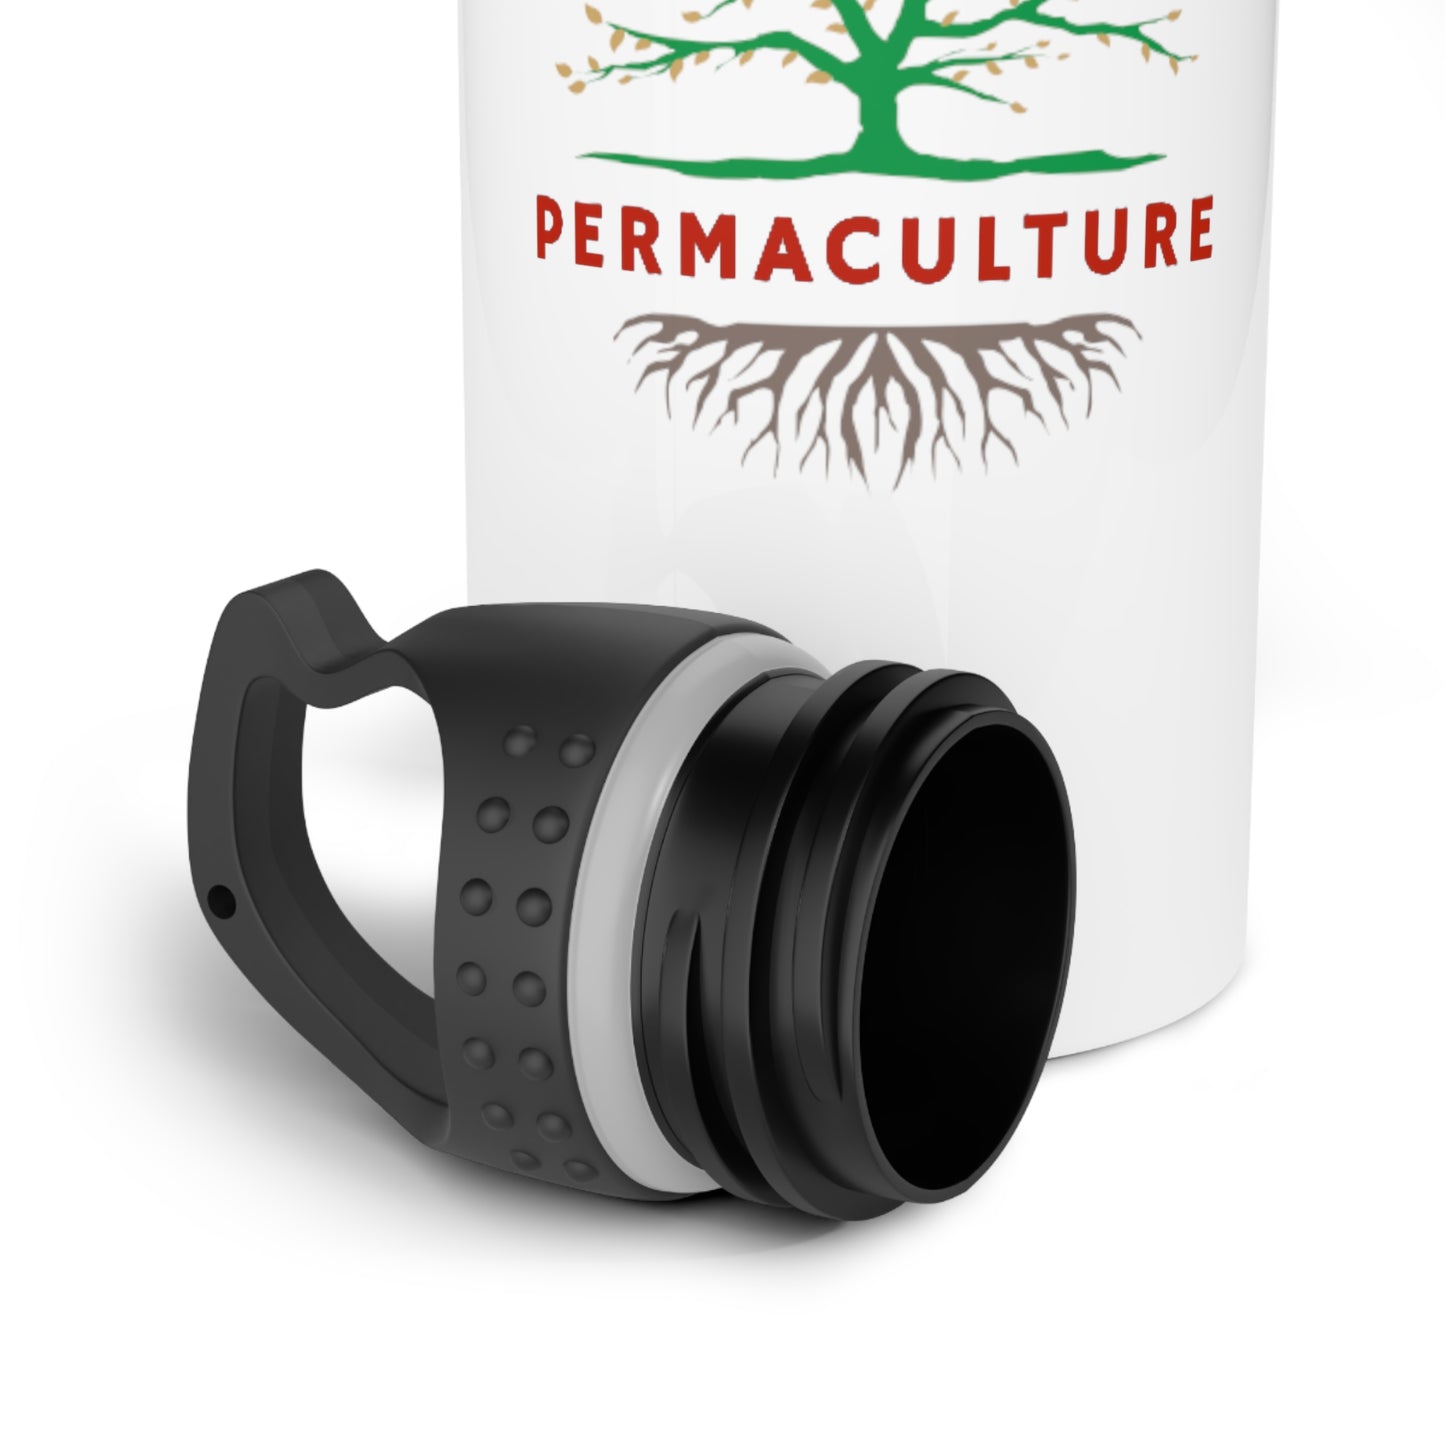 PERMACULTURE Stainless Steel Water Bottle